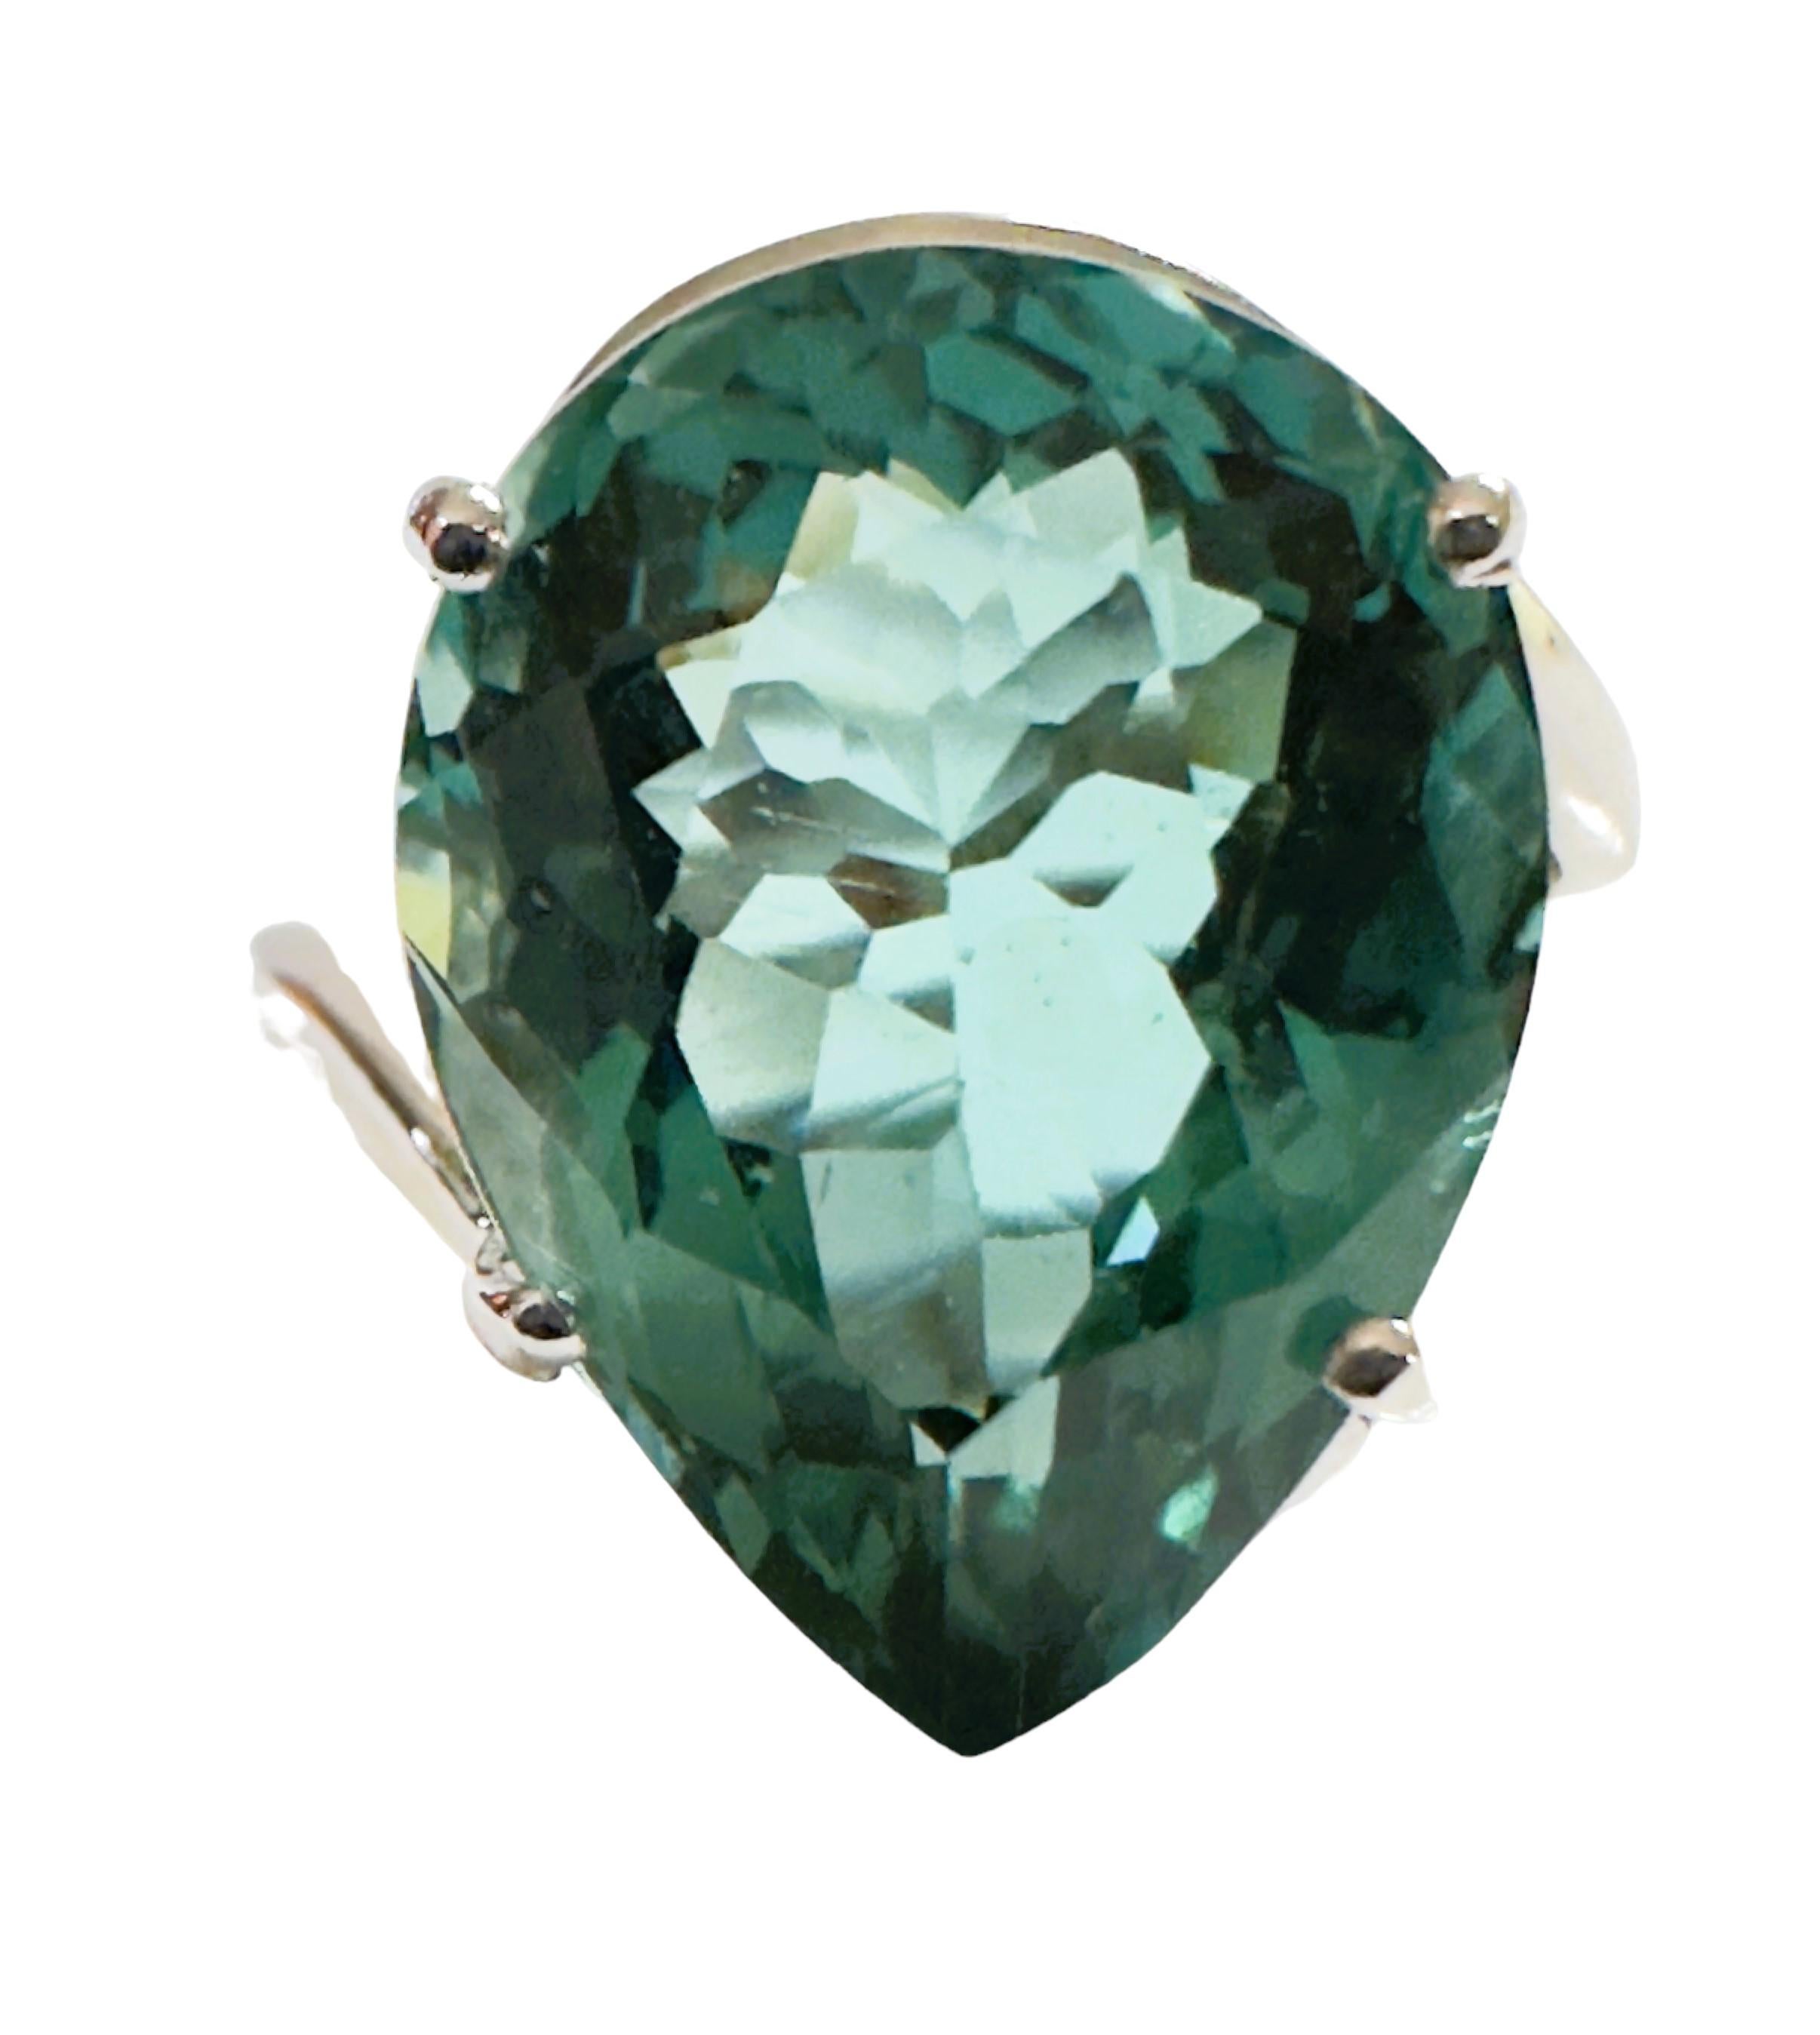 What a beautiful ring!  The ring is a size 6.25. This stone is from the Philippines. It is a beautiful pear cut stone and is 8.7 cts.  It's a very high quality stone.  The 